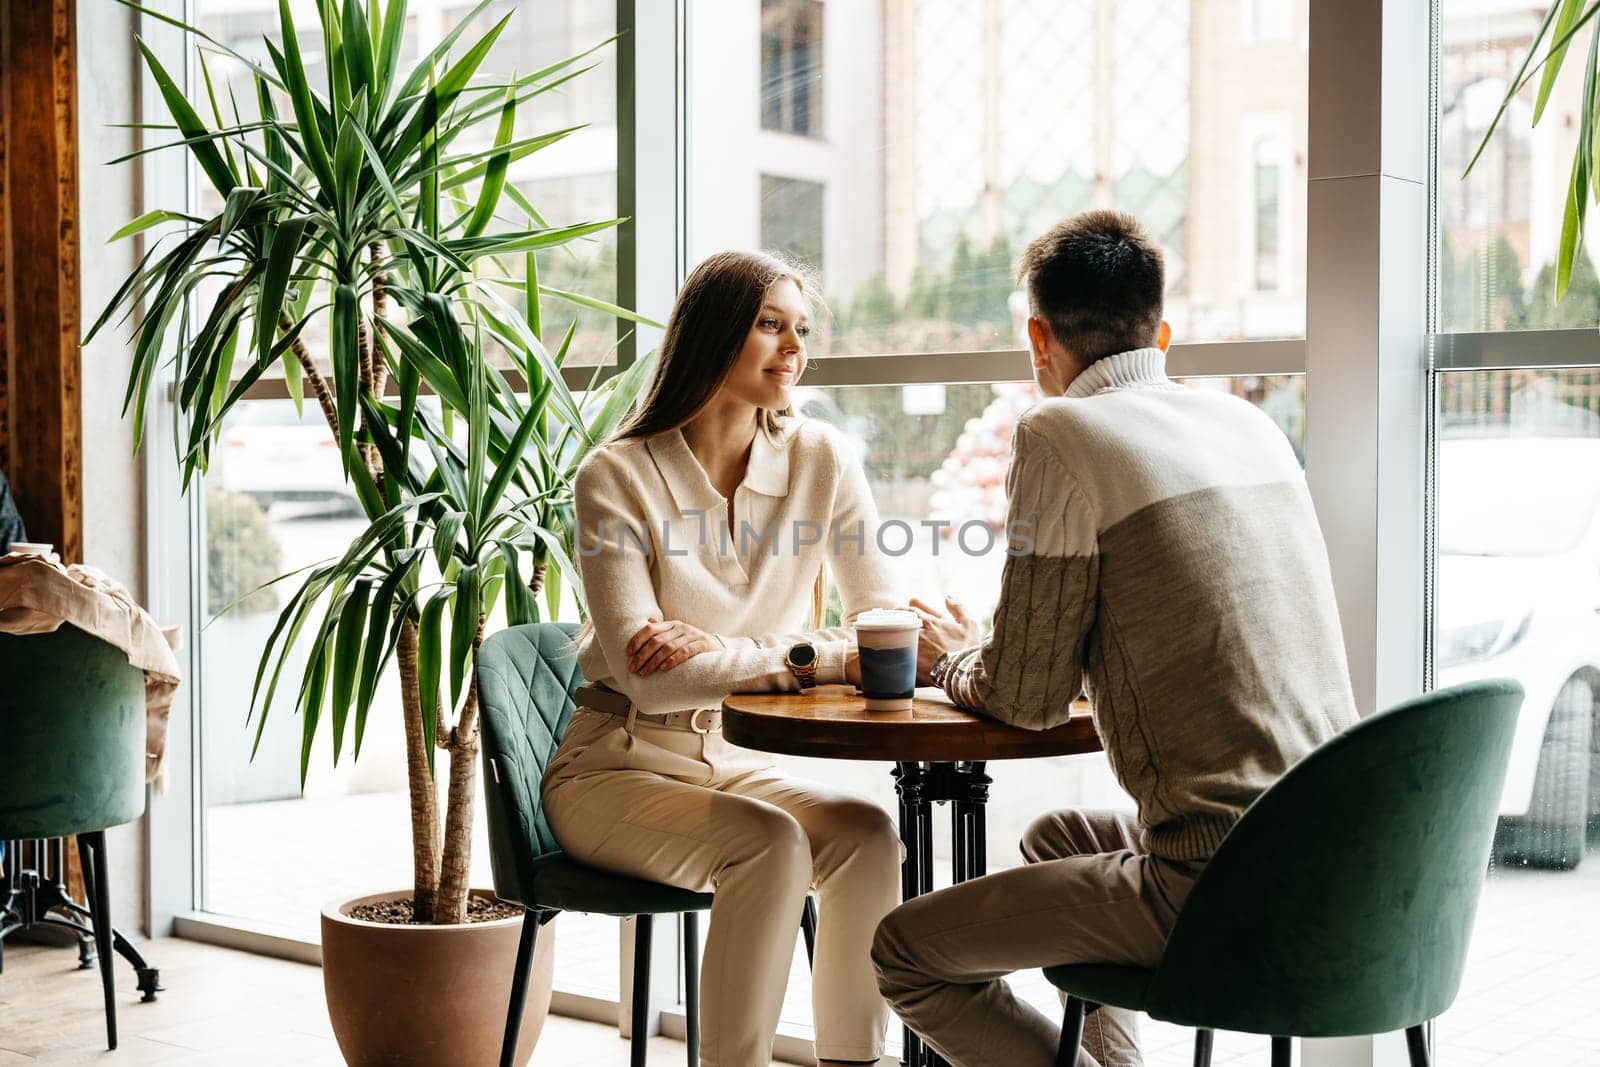 A man and woman are seated opposite each other at a small table, deeply engaged in a conversation. The man, wearing a white knit sweater, listens attentively to the woman with his hands gently clasped. The warm ambiance of the cafe, with soft natural light spilling in, adds to the intimate setting.